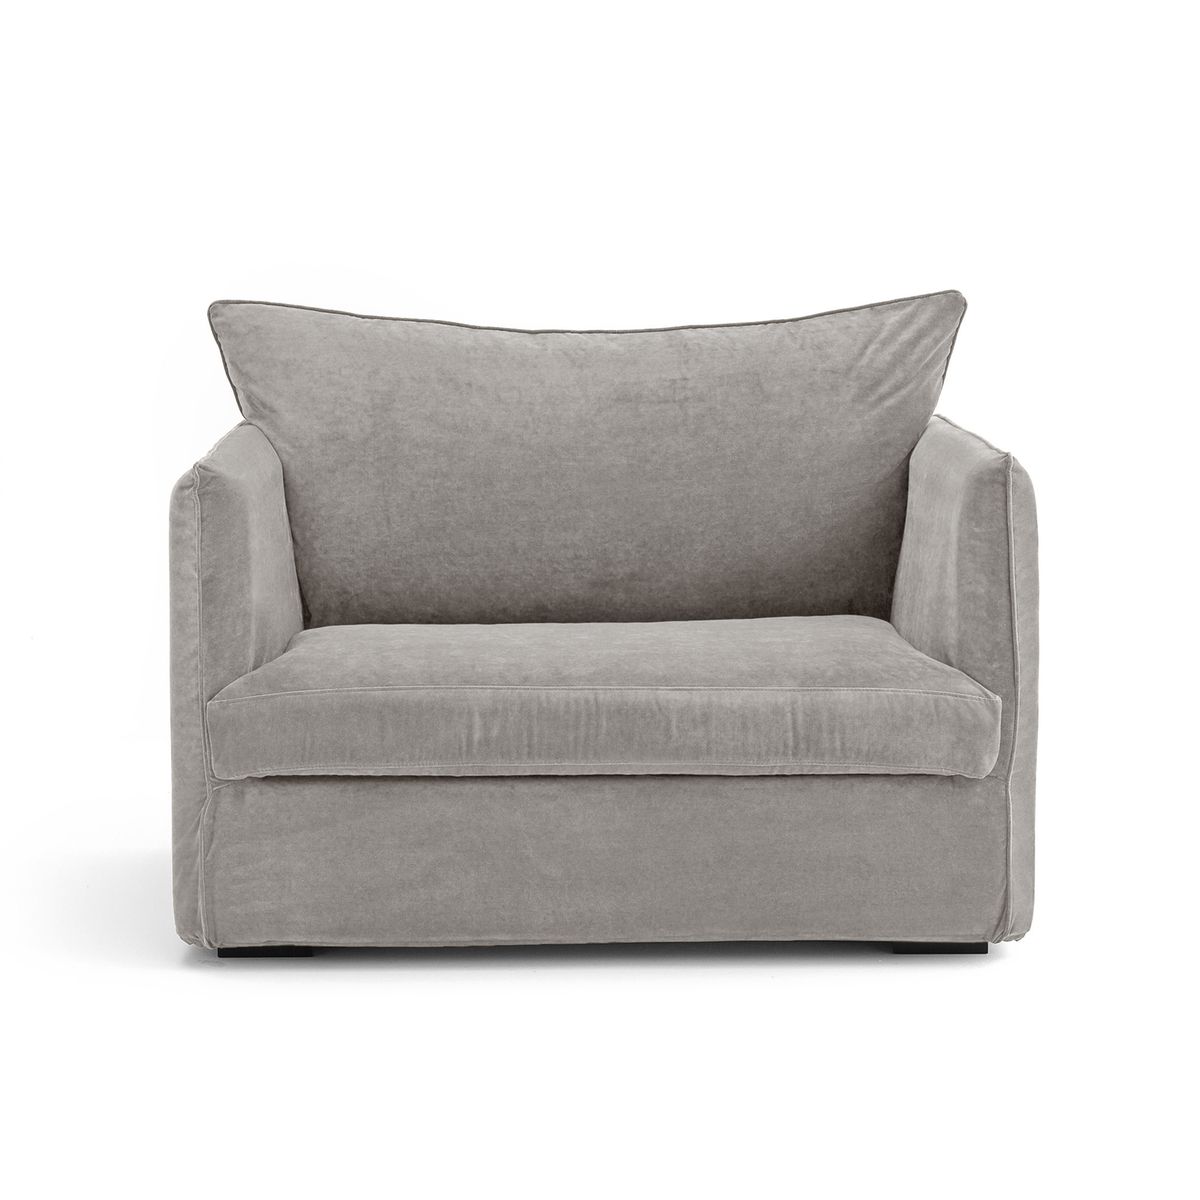 Fauteuil XL conv velours stonewashed, Neo Chiquito